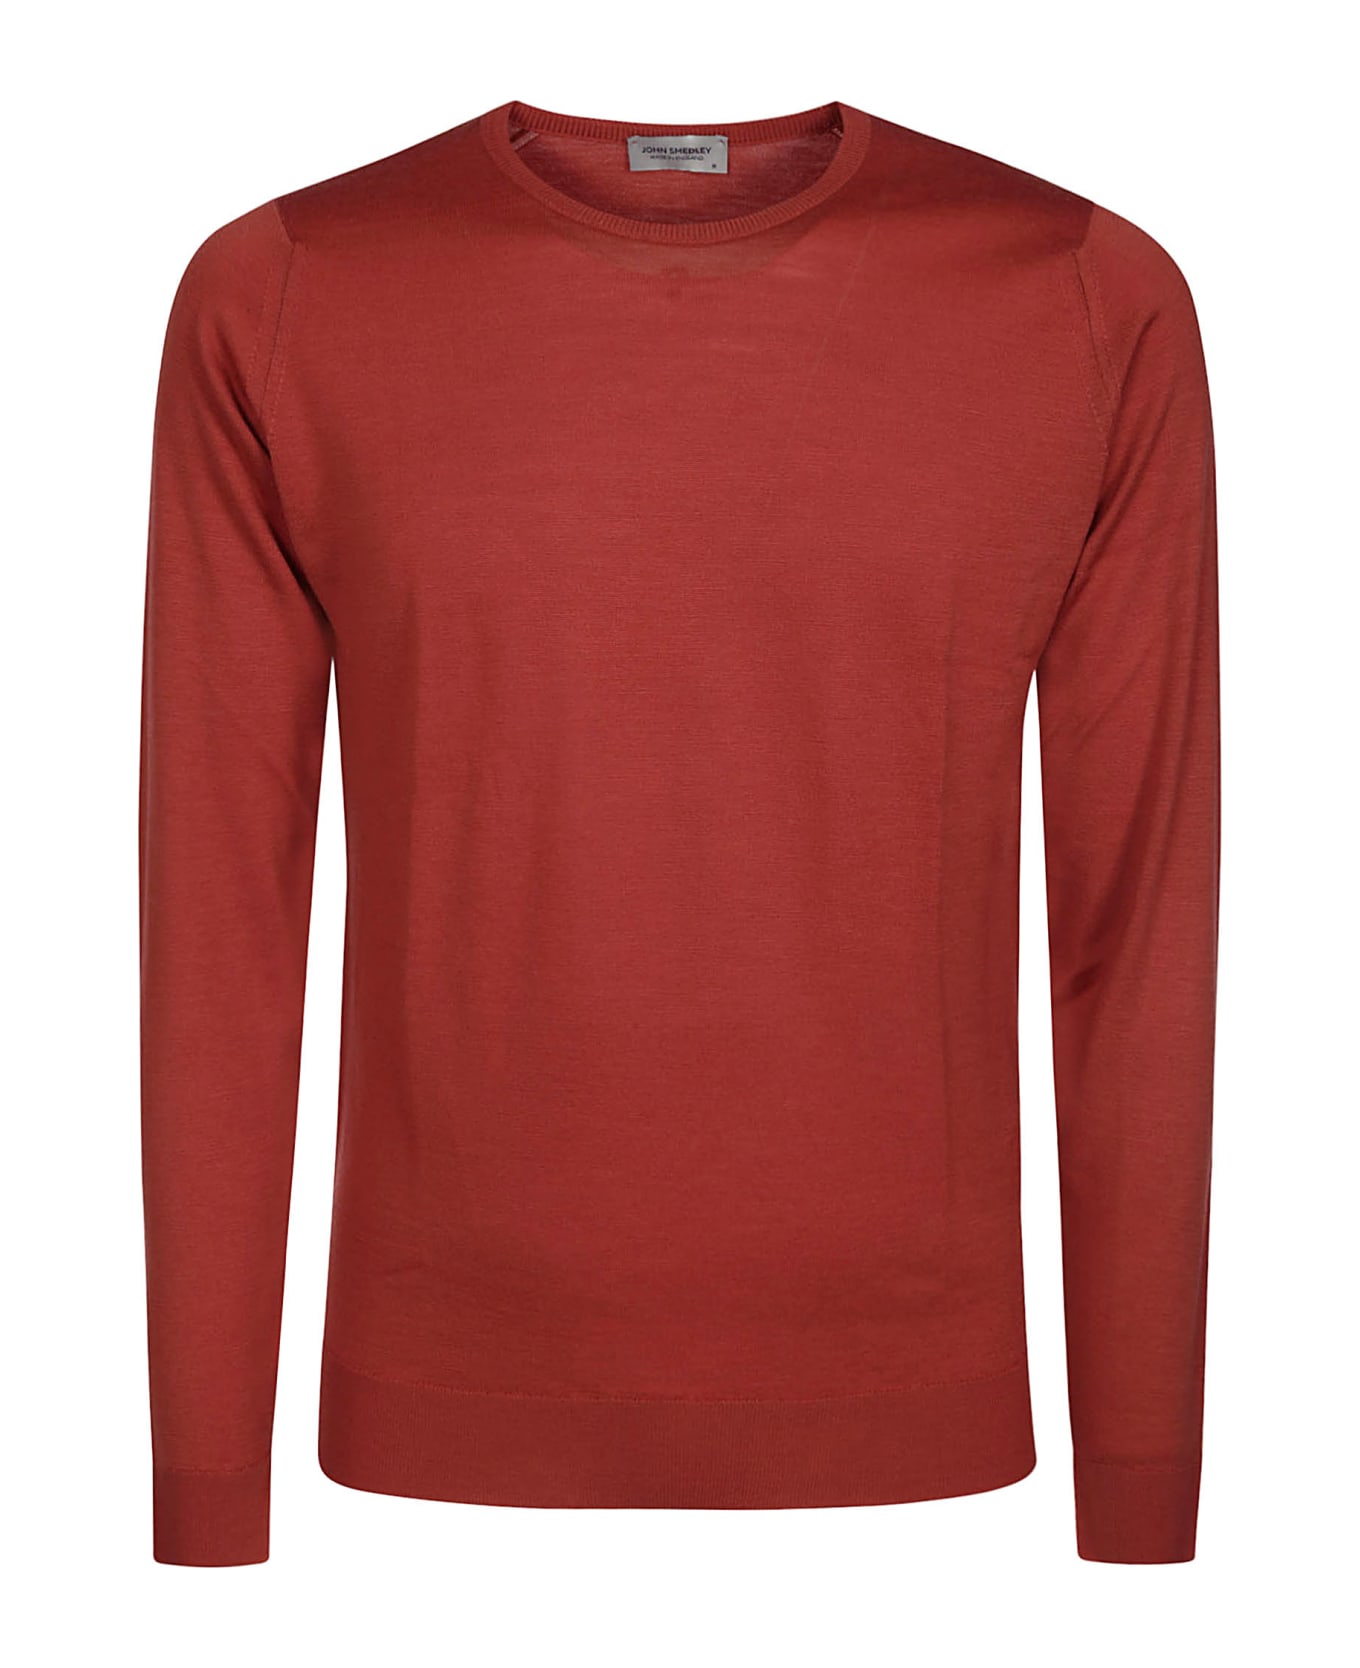 John Smedley Lundy Pullover Ls - Redwood